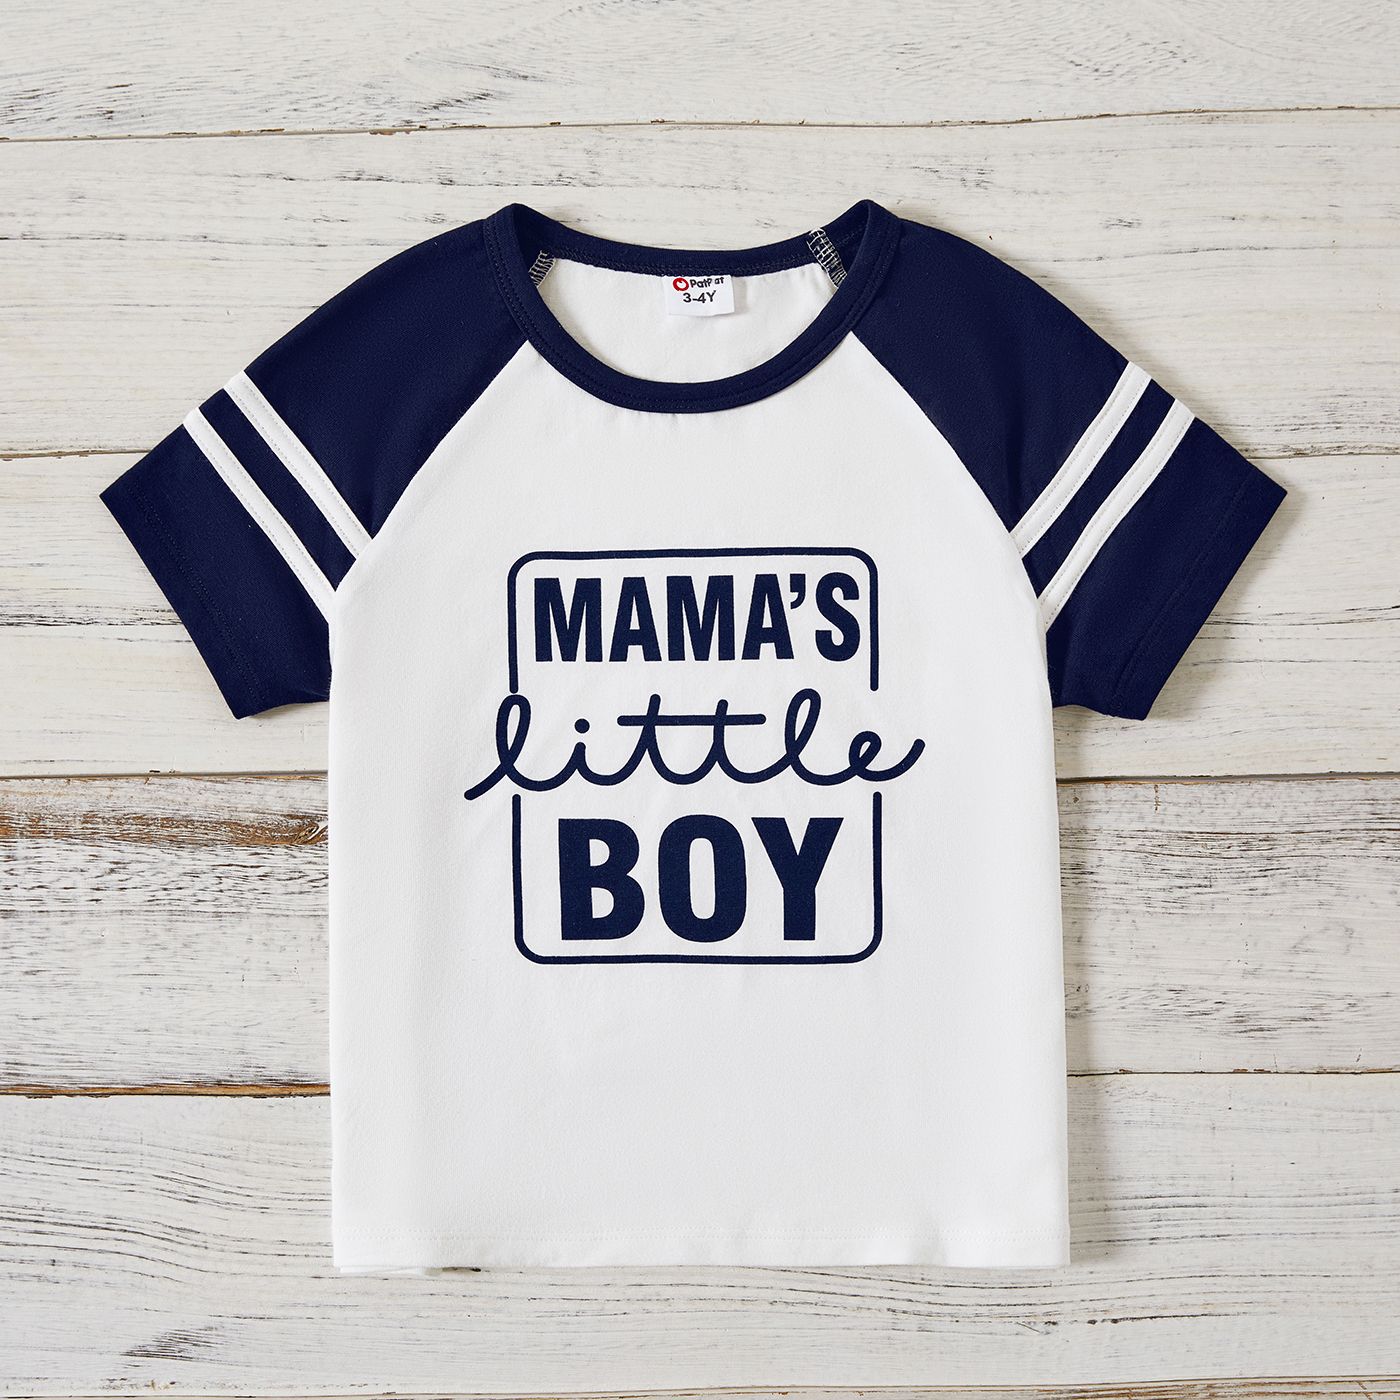 Sibling Matching School Cotton Letters Print Short-sleeve Tops